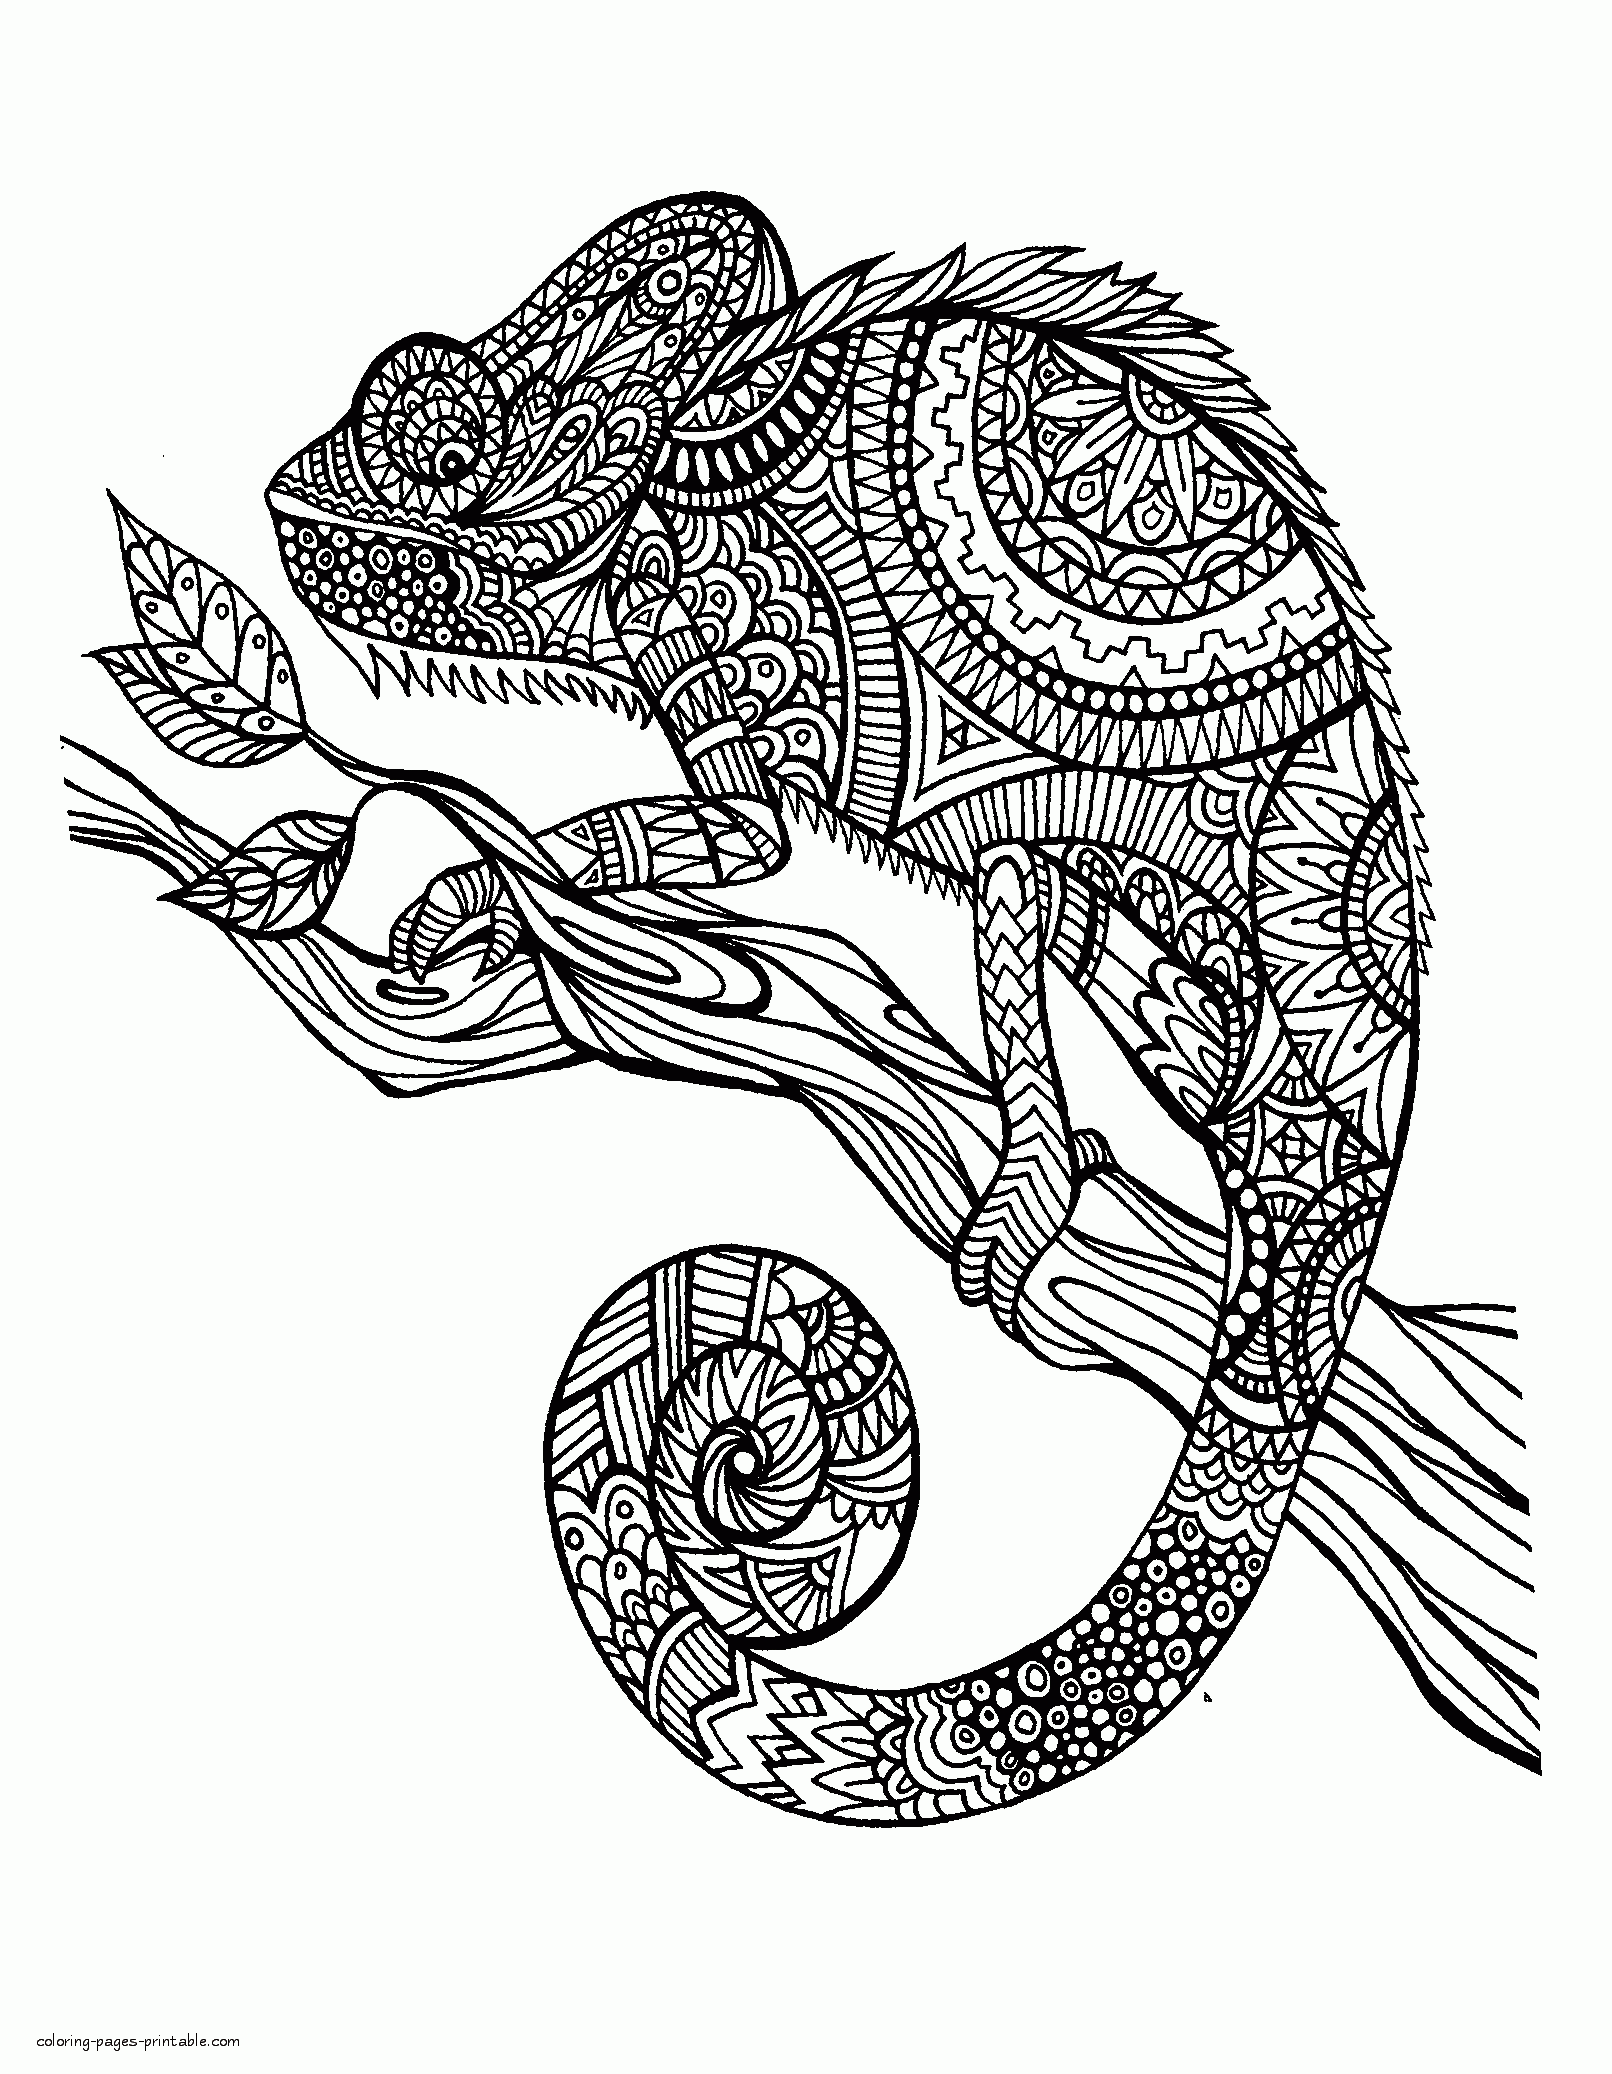 coloring pages for adults chameleon a color of his own the mixed up chameleon lesson plan chameleon adults for coloring pages 